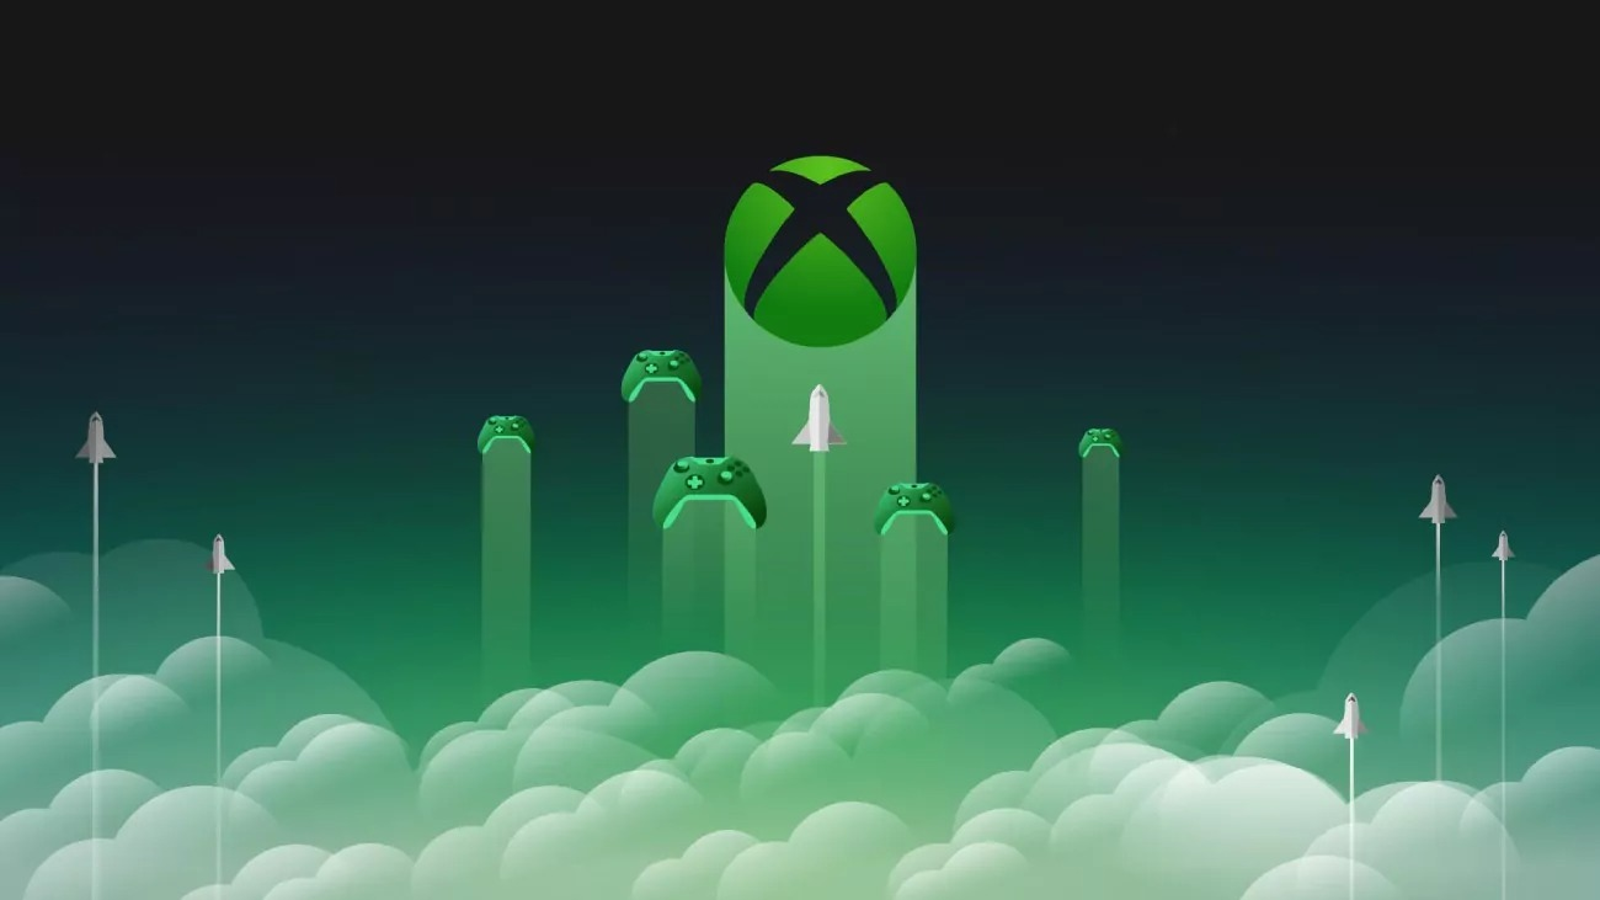 Microsoft's Xbox cloud effort to include smart TVs, streaming hardware